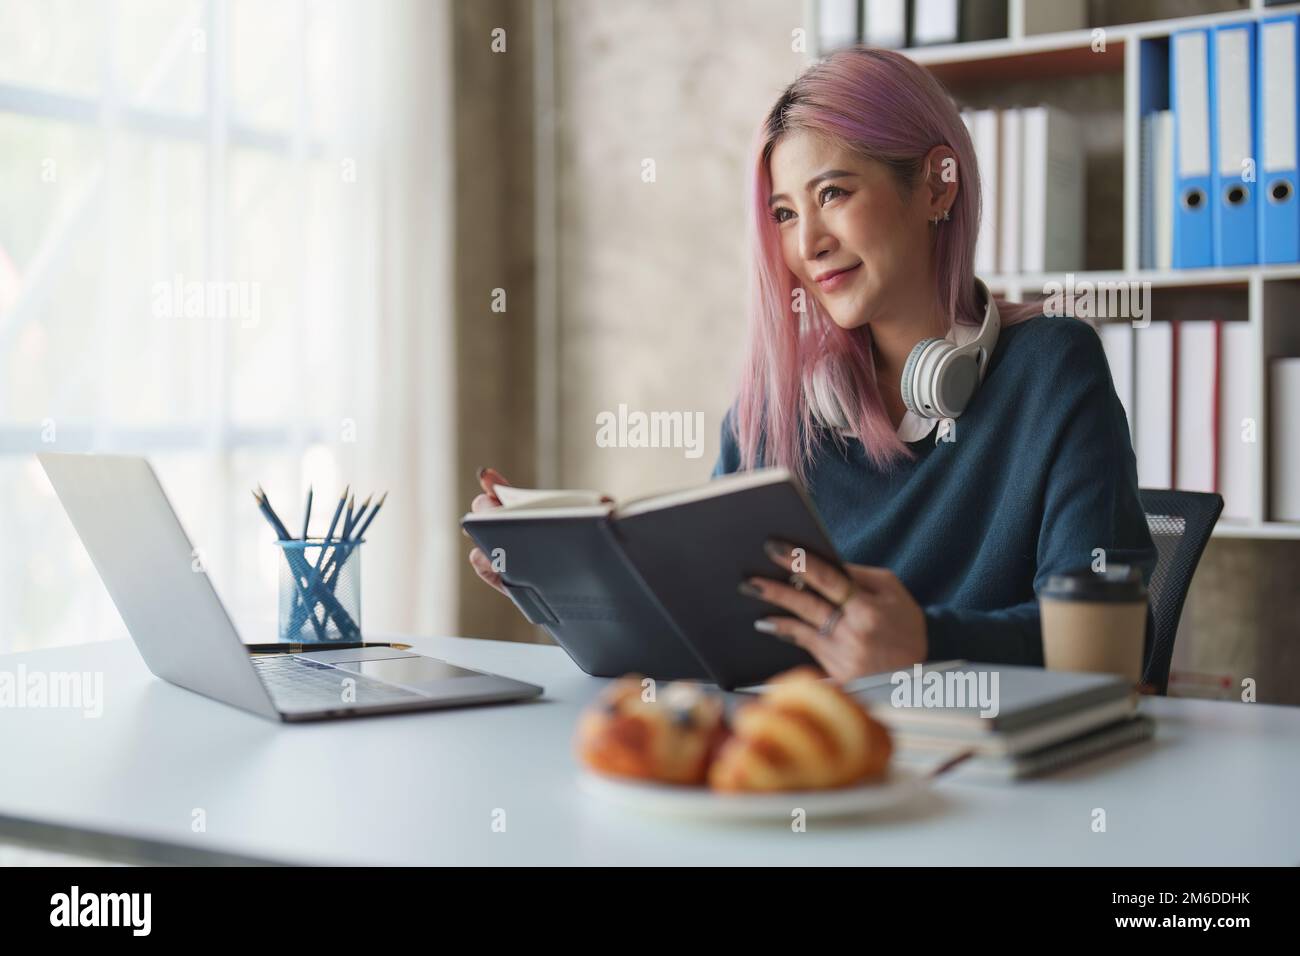 Beautiful Asian Woman read a book at home. The style lifestyle and concept of people enjoying life at home Stock Photo